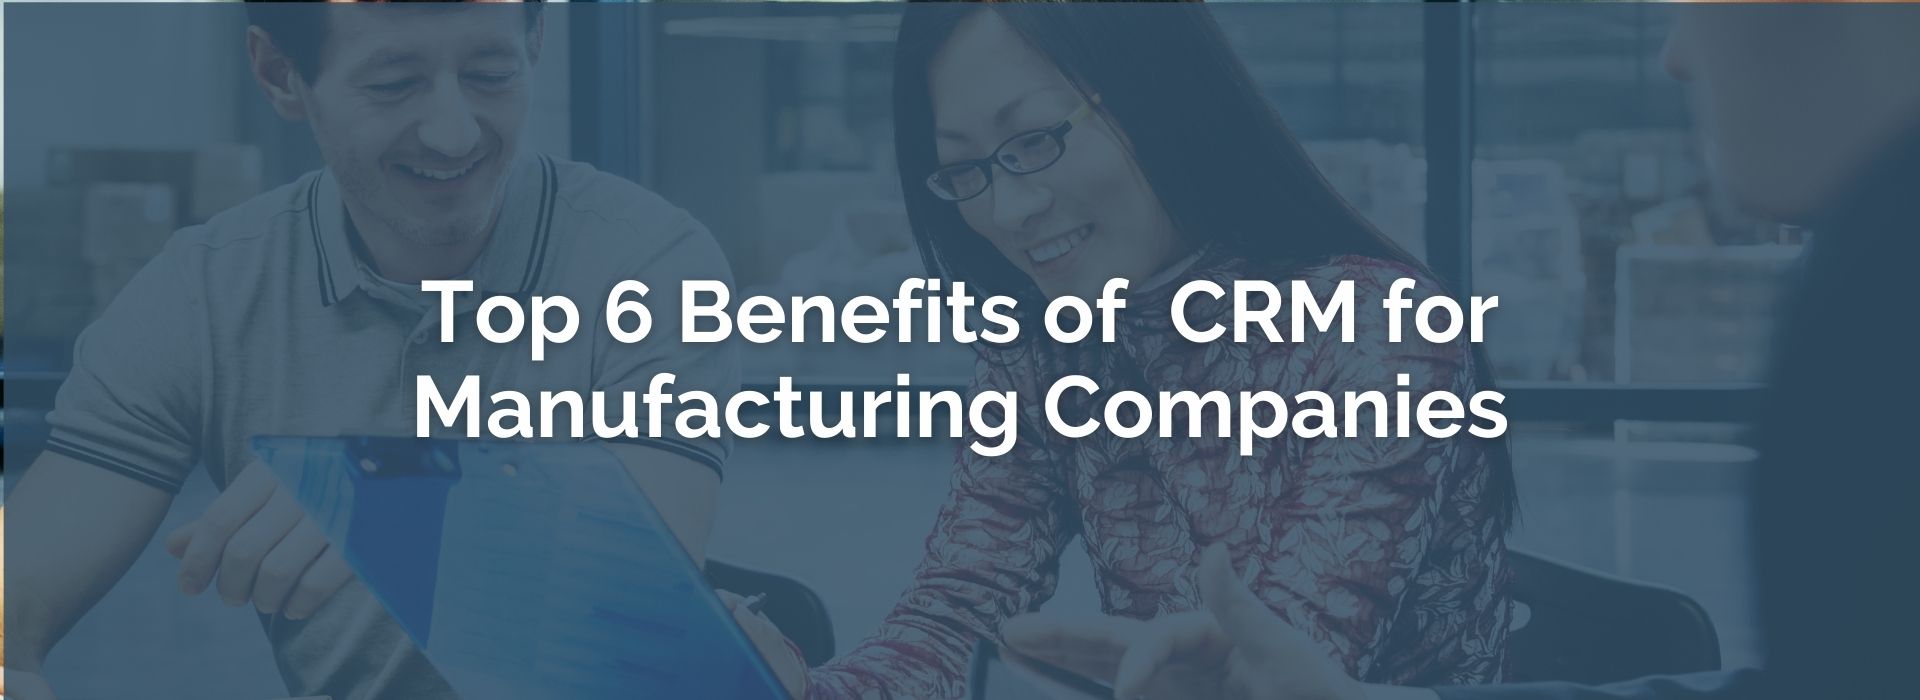 TOP 6 BENEFITS OF CRM FOR MANUFACTURING COMPANIES